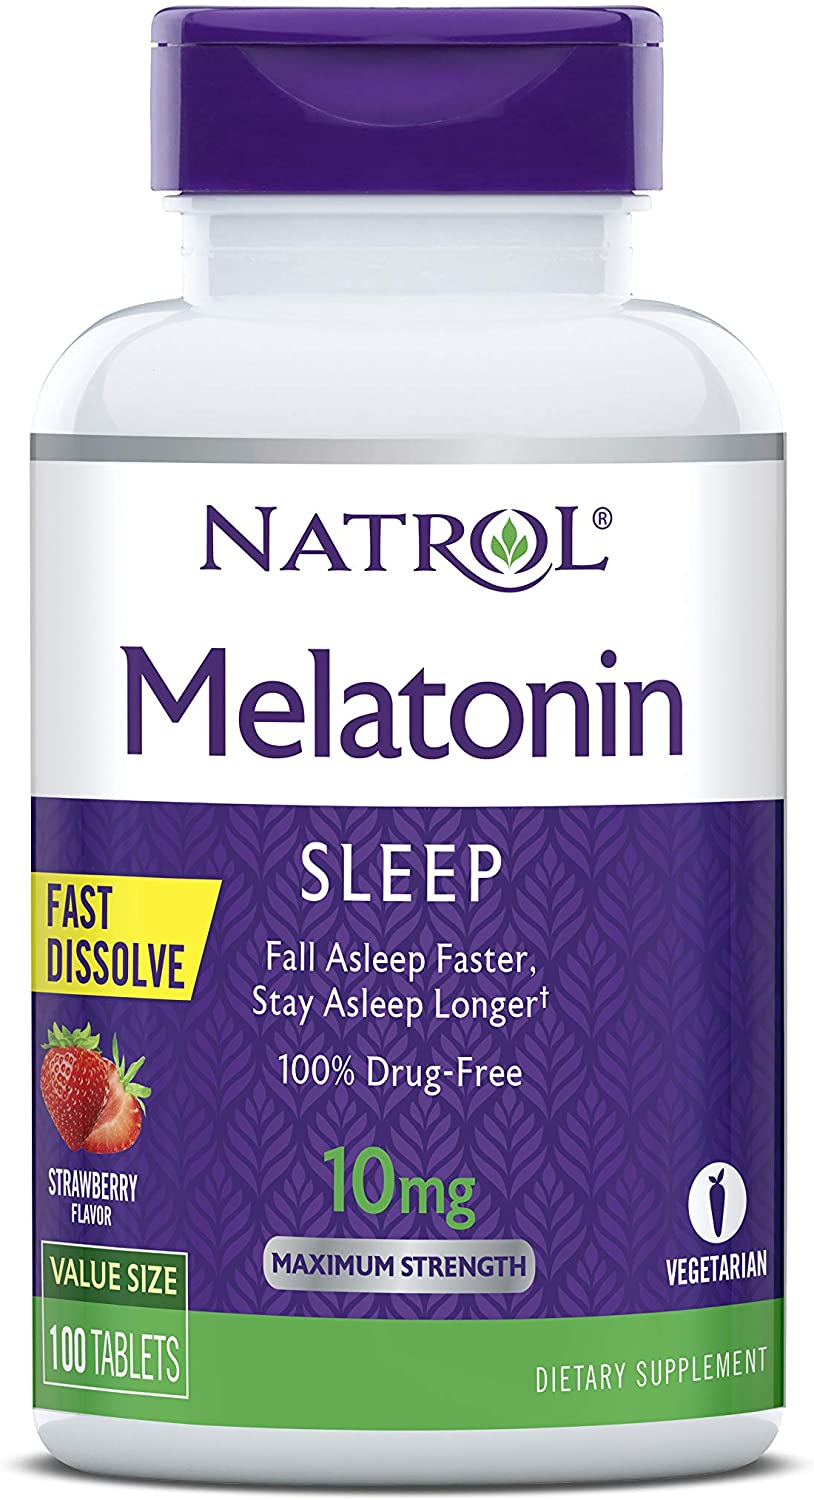 what happens if you take melatonin and dont go to sleep